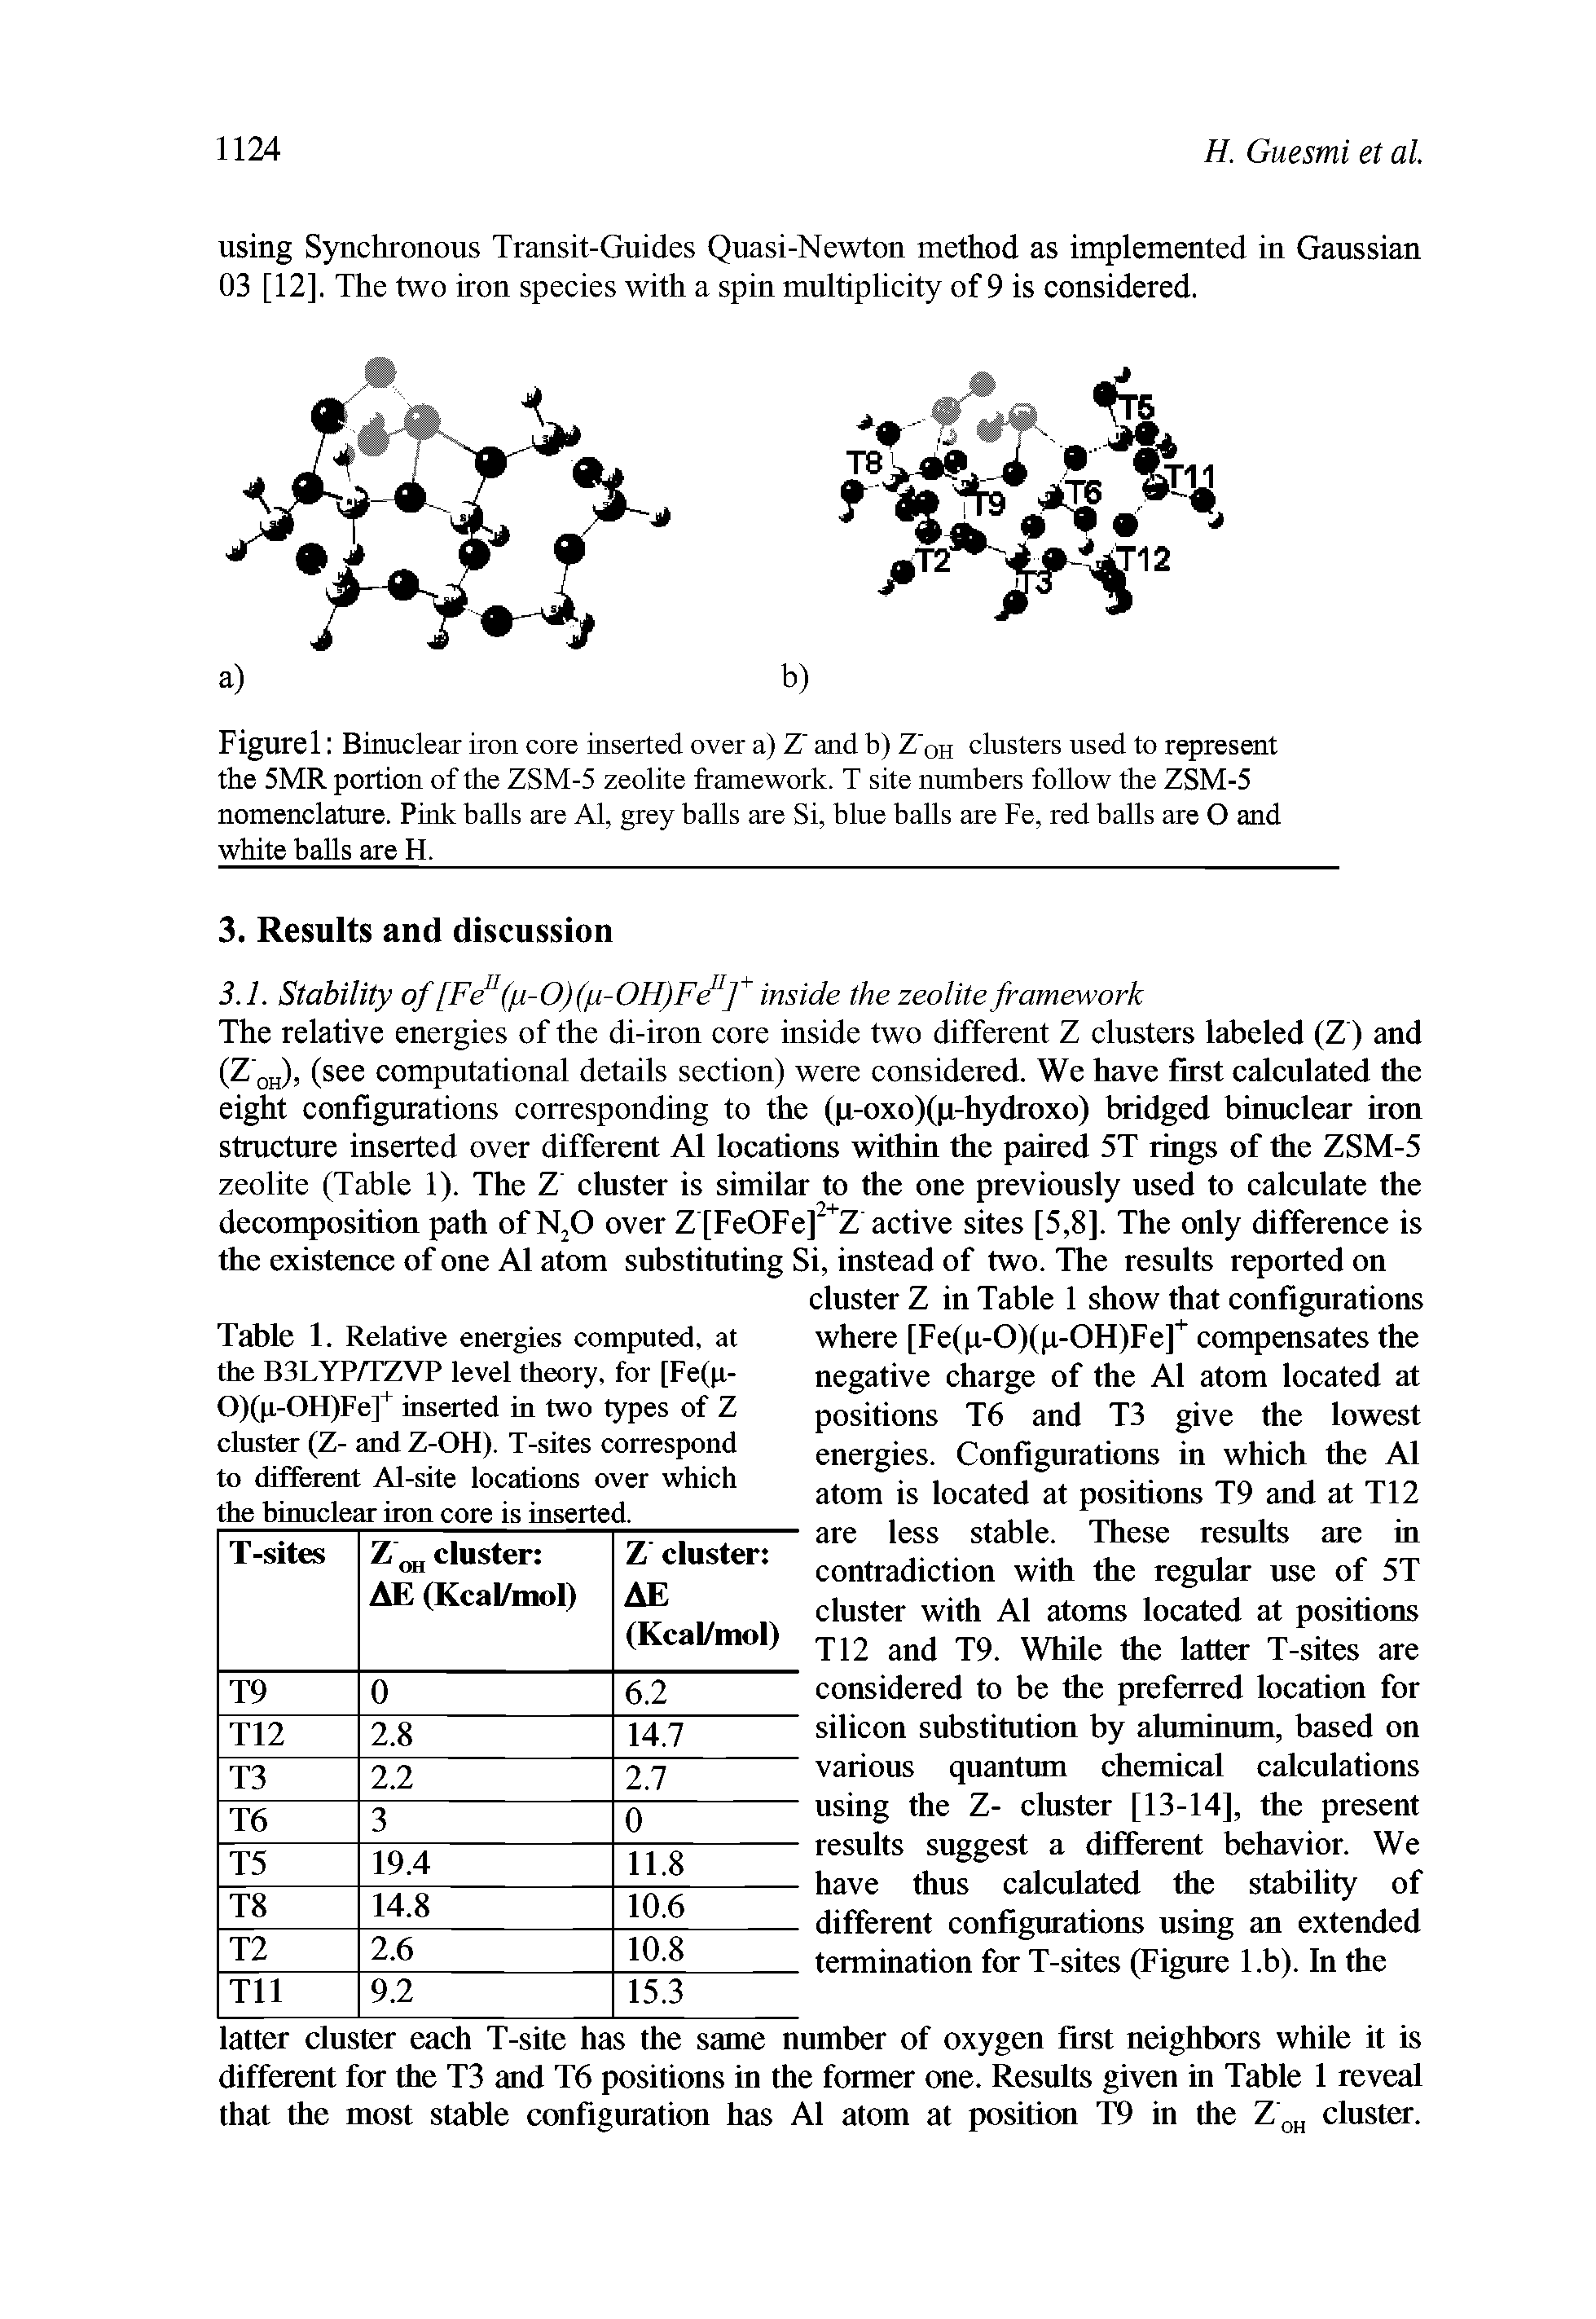 Table 1. Relative energies computed, at the B3LYP/TZVP level theory, for [Fe(p-0)(p-0l I)Fe 1 inserted in two types of Z cluster (Z- and Z-OH). T-sites correspond to different Al-site locations over which the hinuclear iron core is inserted.